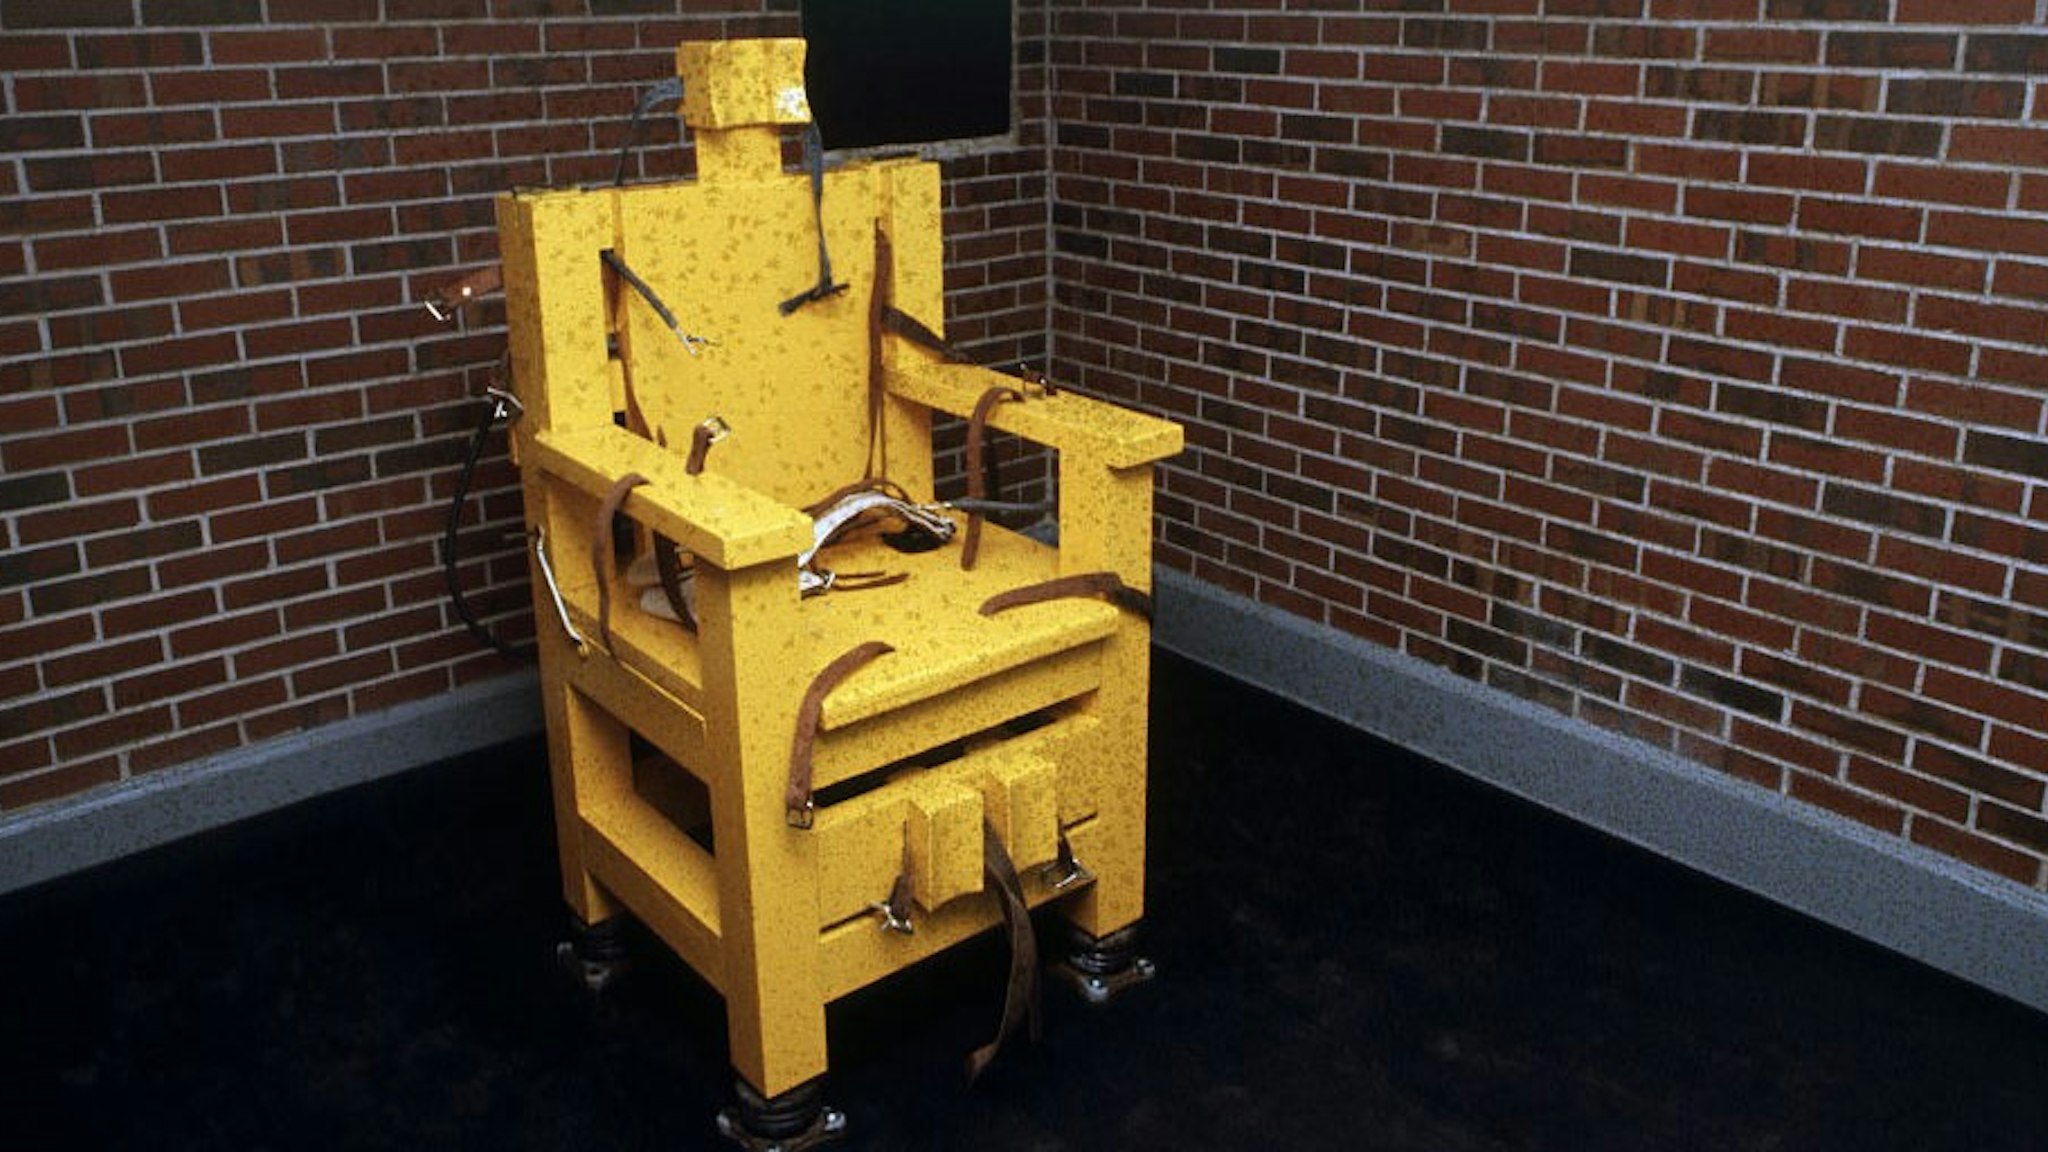 The electric chair at Holman Prison in Atmore, Alabama, USA. This electric chair will be used to execute prisoner John Louis Evan. | Location: Atmore, Alabama, USA.